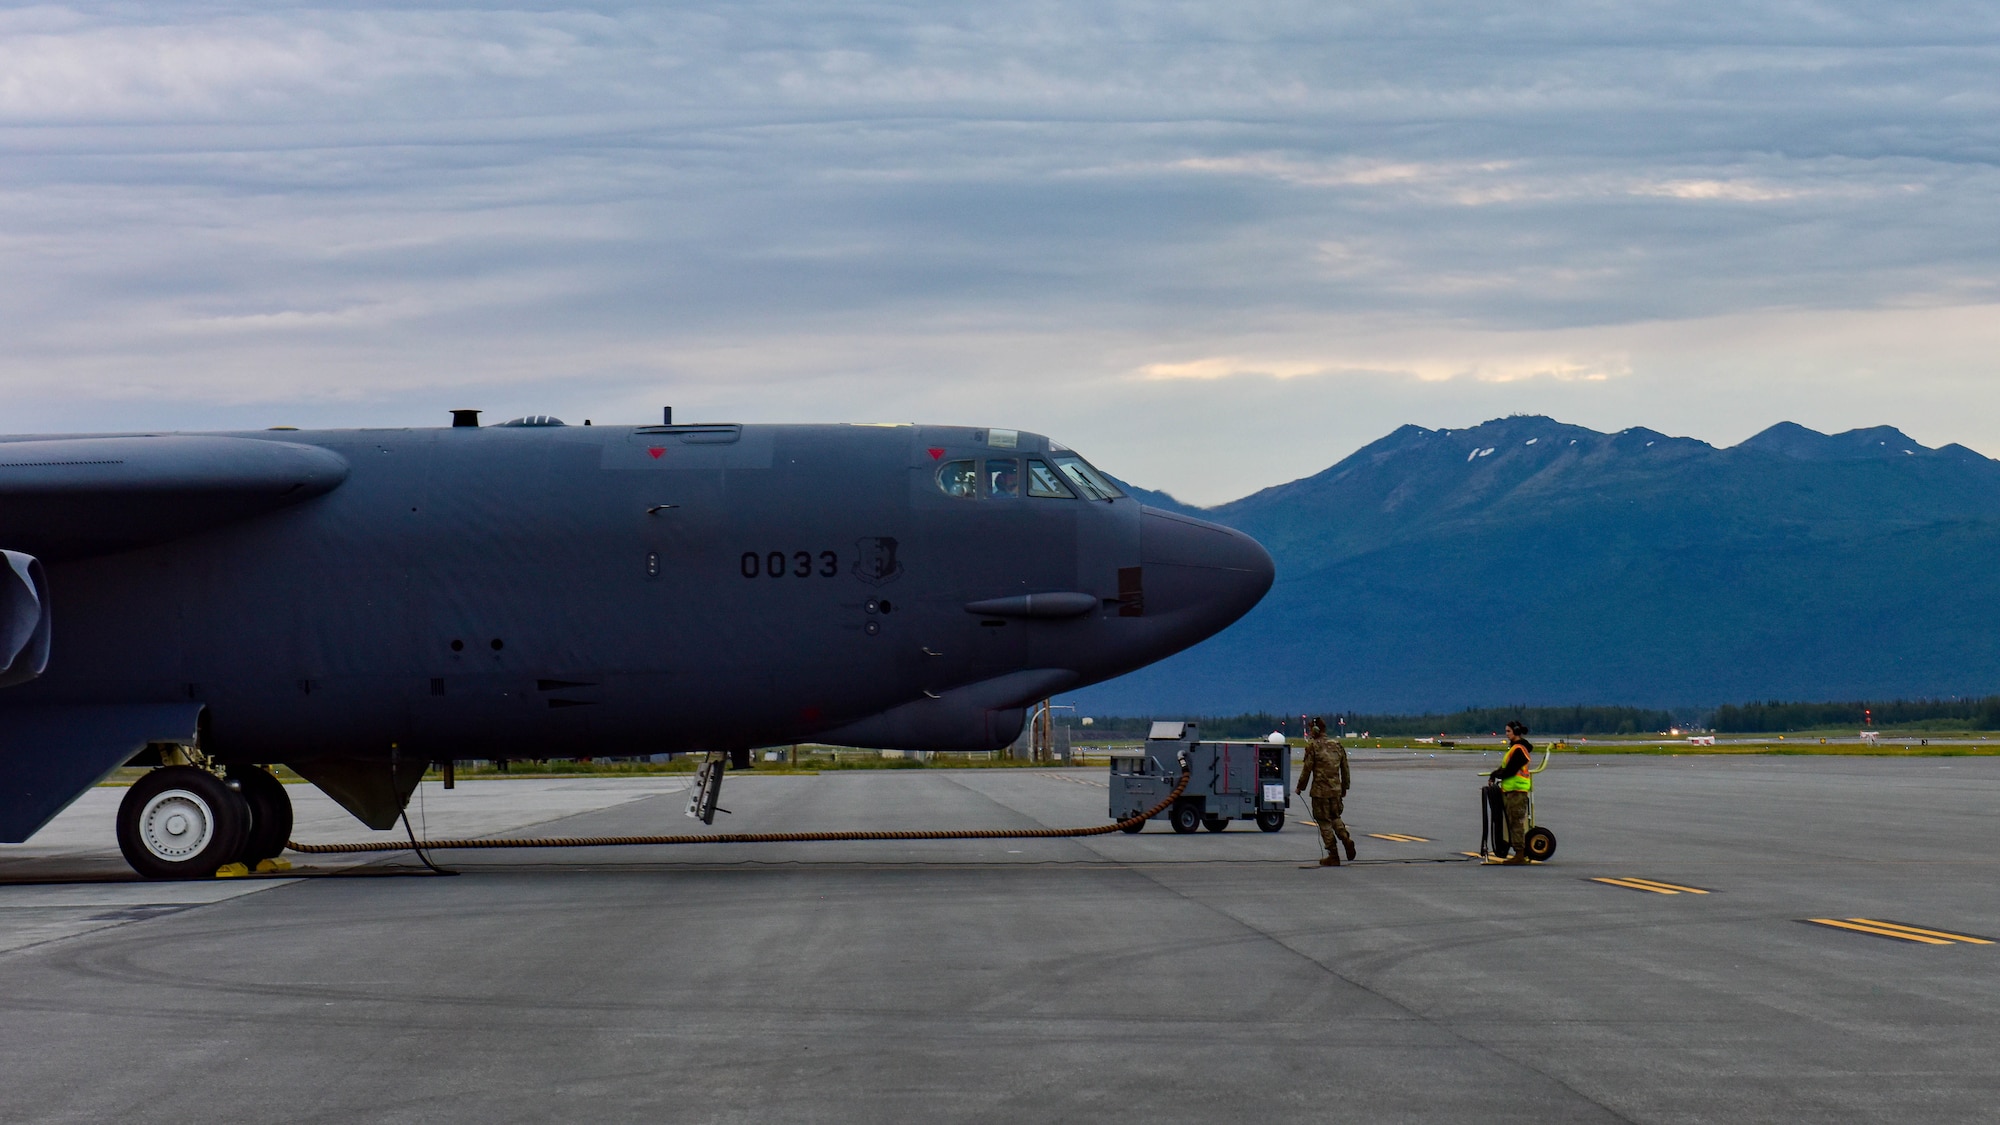 A B-52H Stratofortress assigned to the 69th Bomb Squadron from Minot Air Force Base, North Dakota, prepares for takeoff in support of a bomber Agile Combat Employment exercise at Joint Base Elmendorf-Richardson, Alaska, July 14, 2023. U.S. Strategic Command forces are on watch 24 hours a day, seven days a week, conducting operations to deter and detect strategic attacks against the United States and our Allies. (U.S. Air Force photo by Senior Airman Zachary Wright)